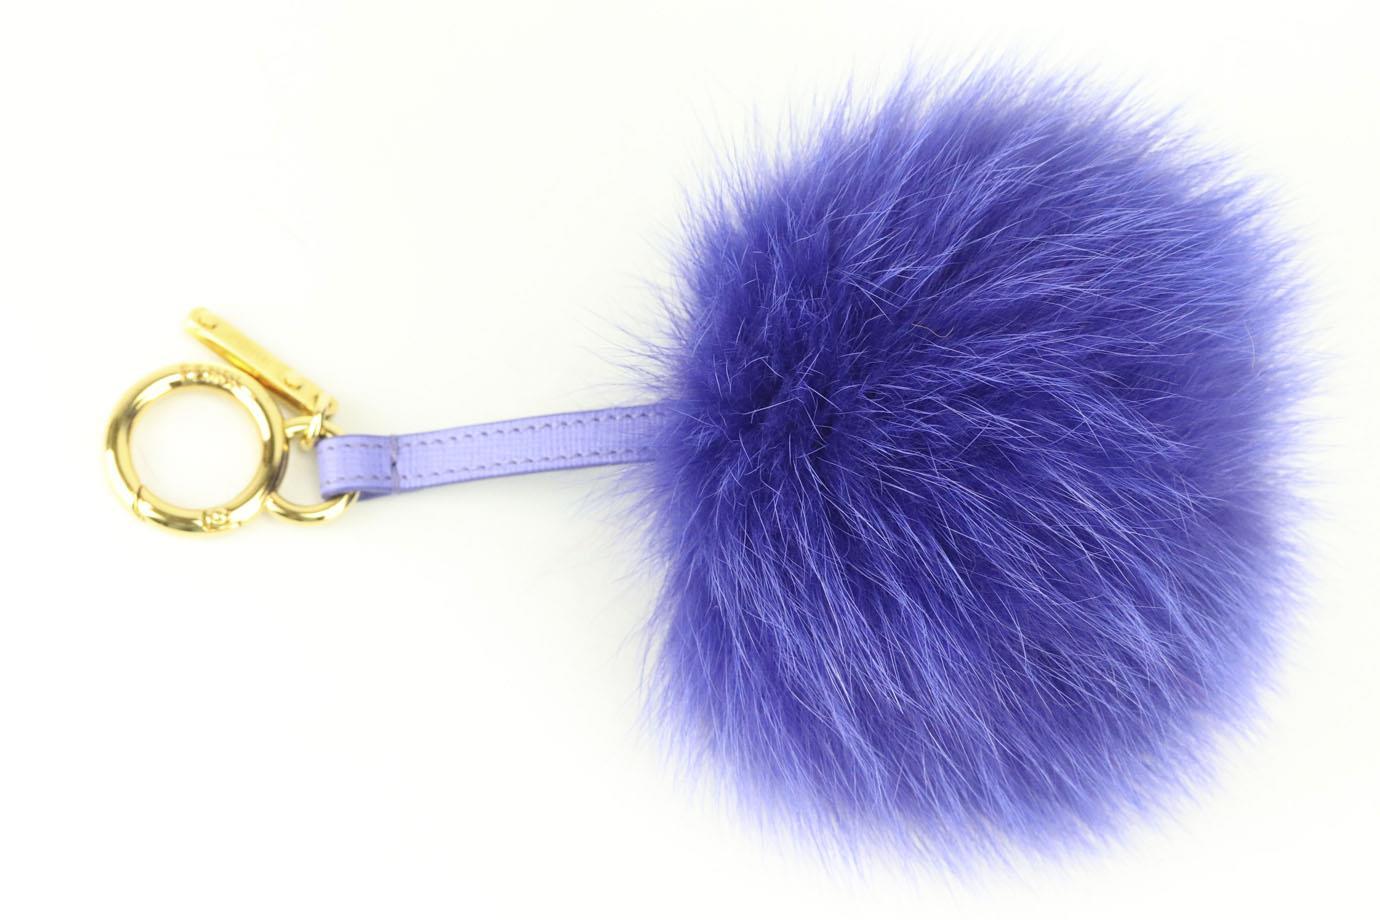 Fendi two tone fox fur and leather bag charm. Pink and beige. Lobster clasp fastening at top. Does not come with dustbag or box. Height: 8 in. Width: 5 in
